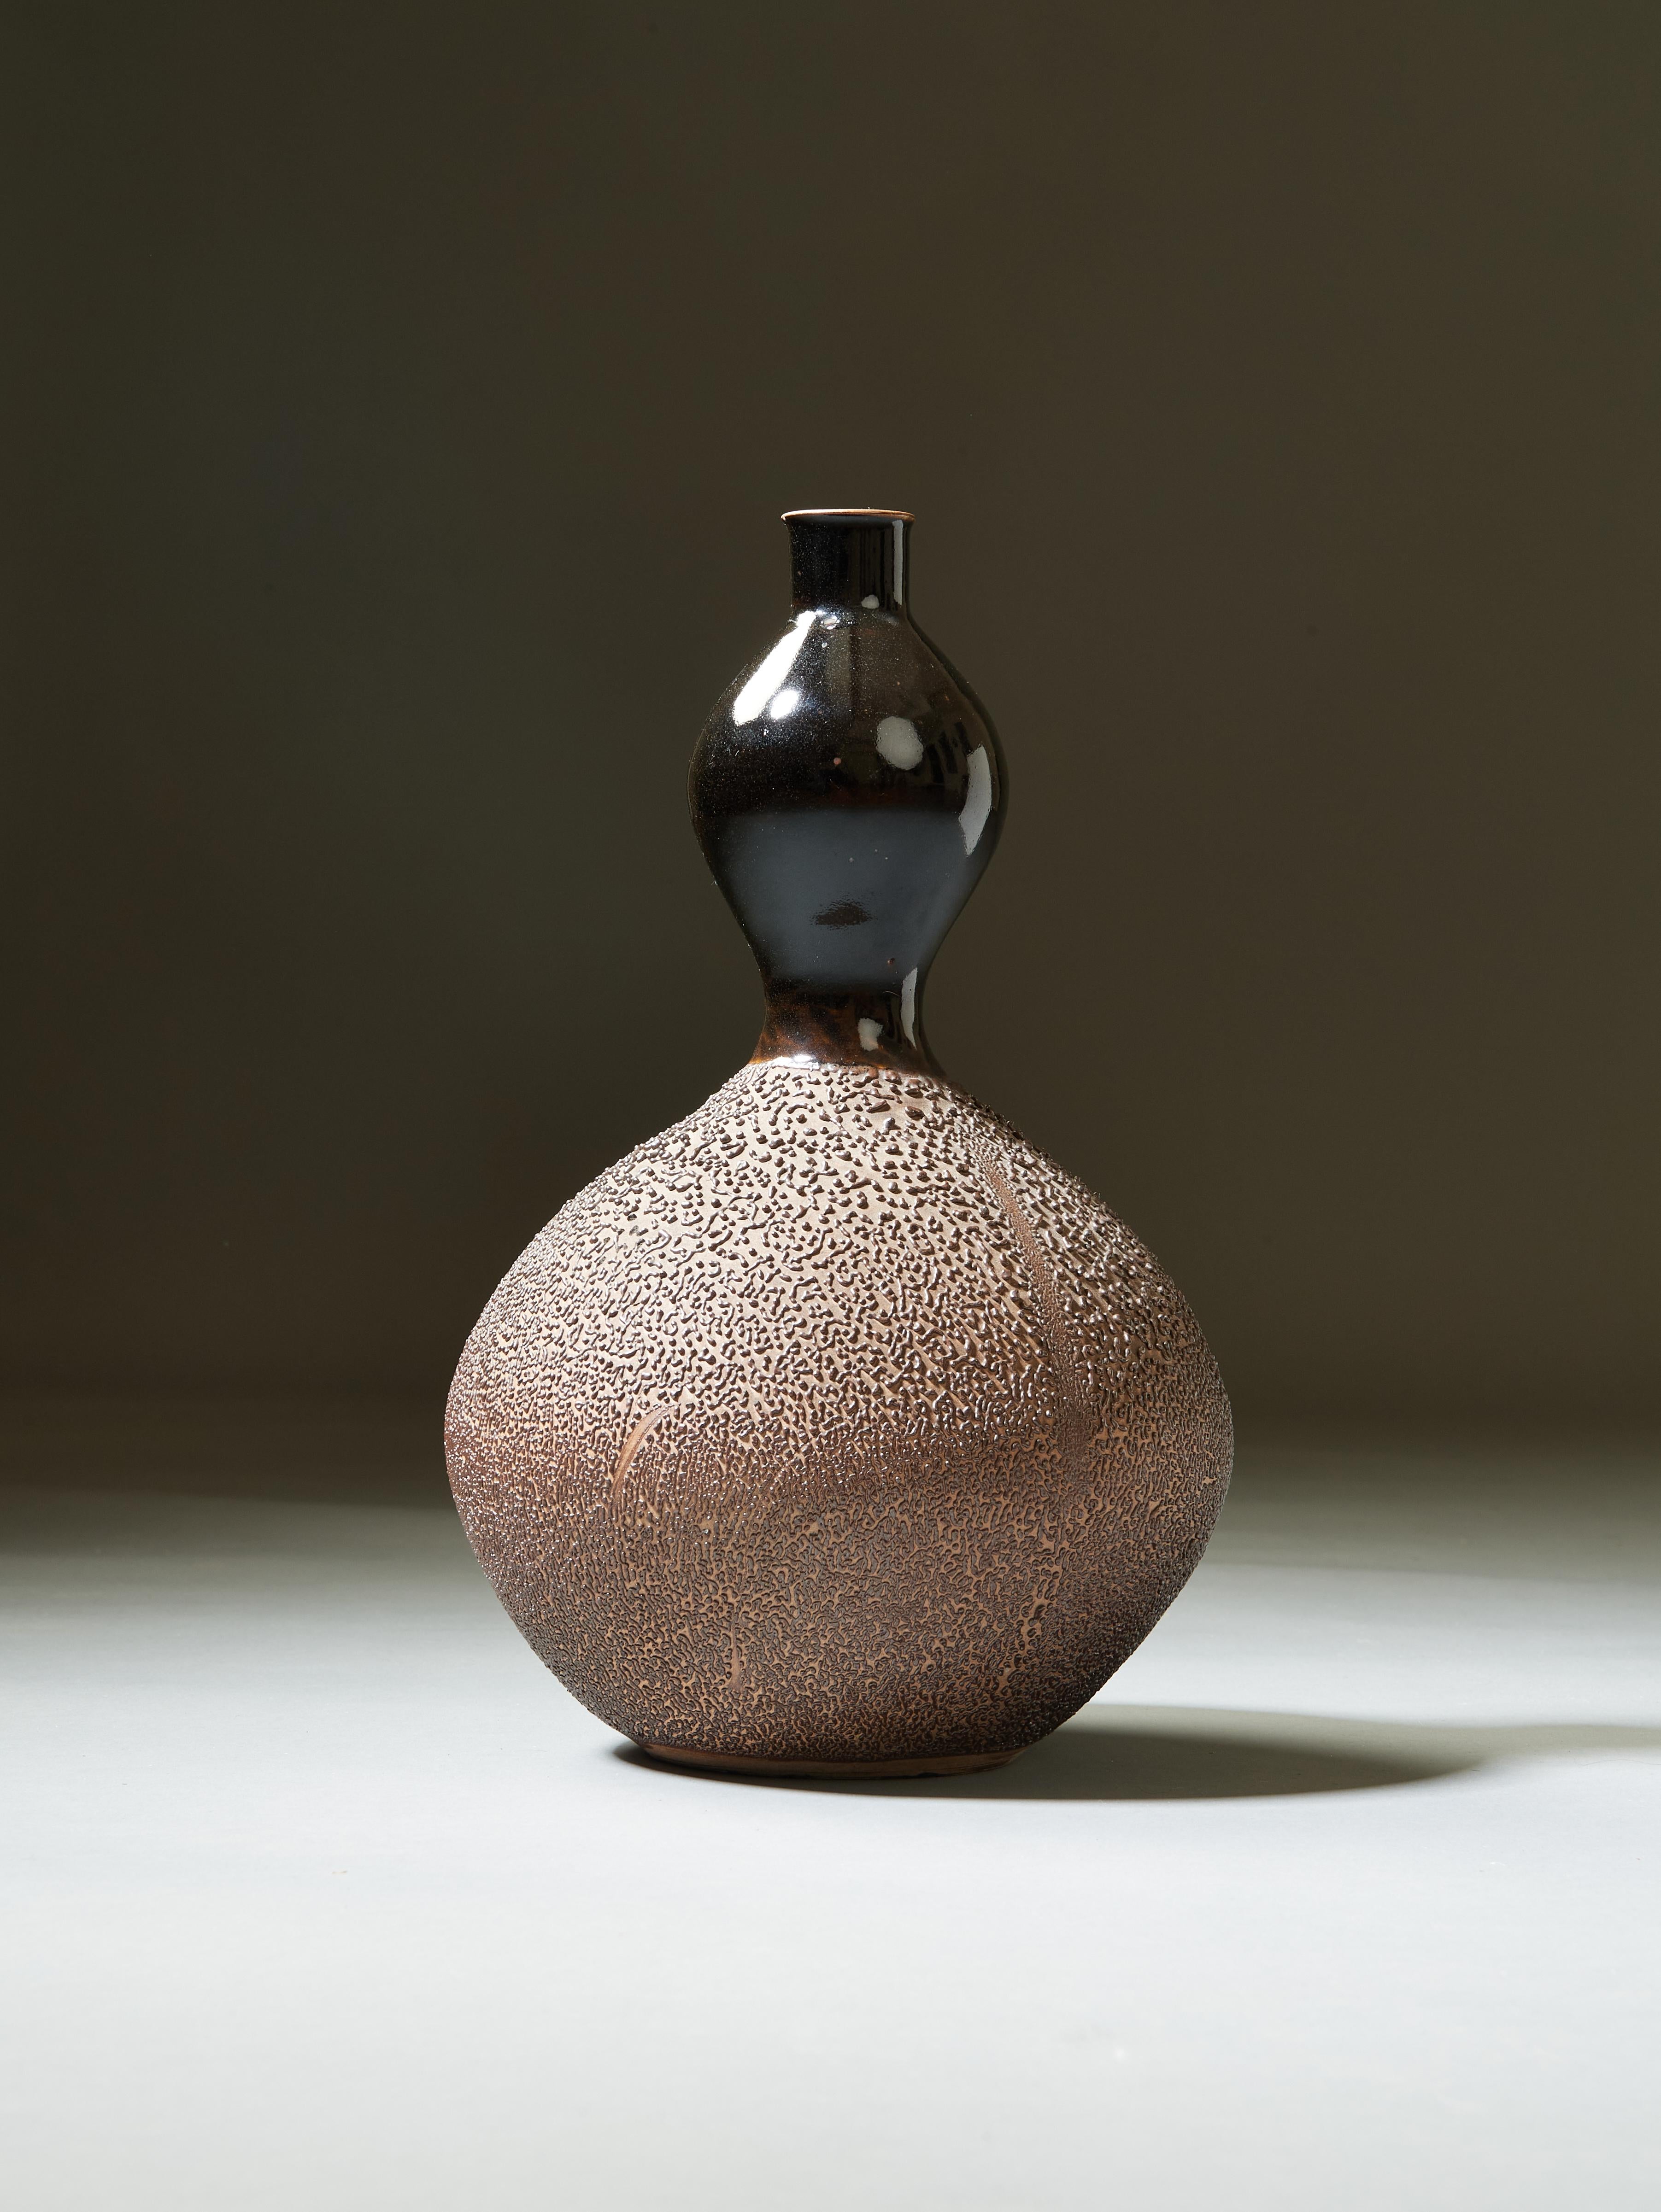 Japan, XXth Century

A sinuous Japanese double-gourd vase, in glazed black and textured earth-toned stoneware. A compressed globular lower bulb, its matte, beautifully tactile surface mottled like melon rind, flows into a smaller upper bulb, with a